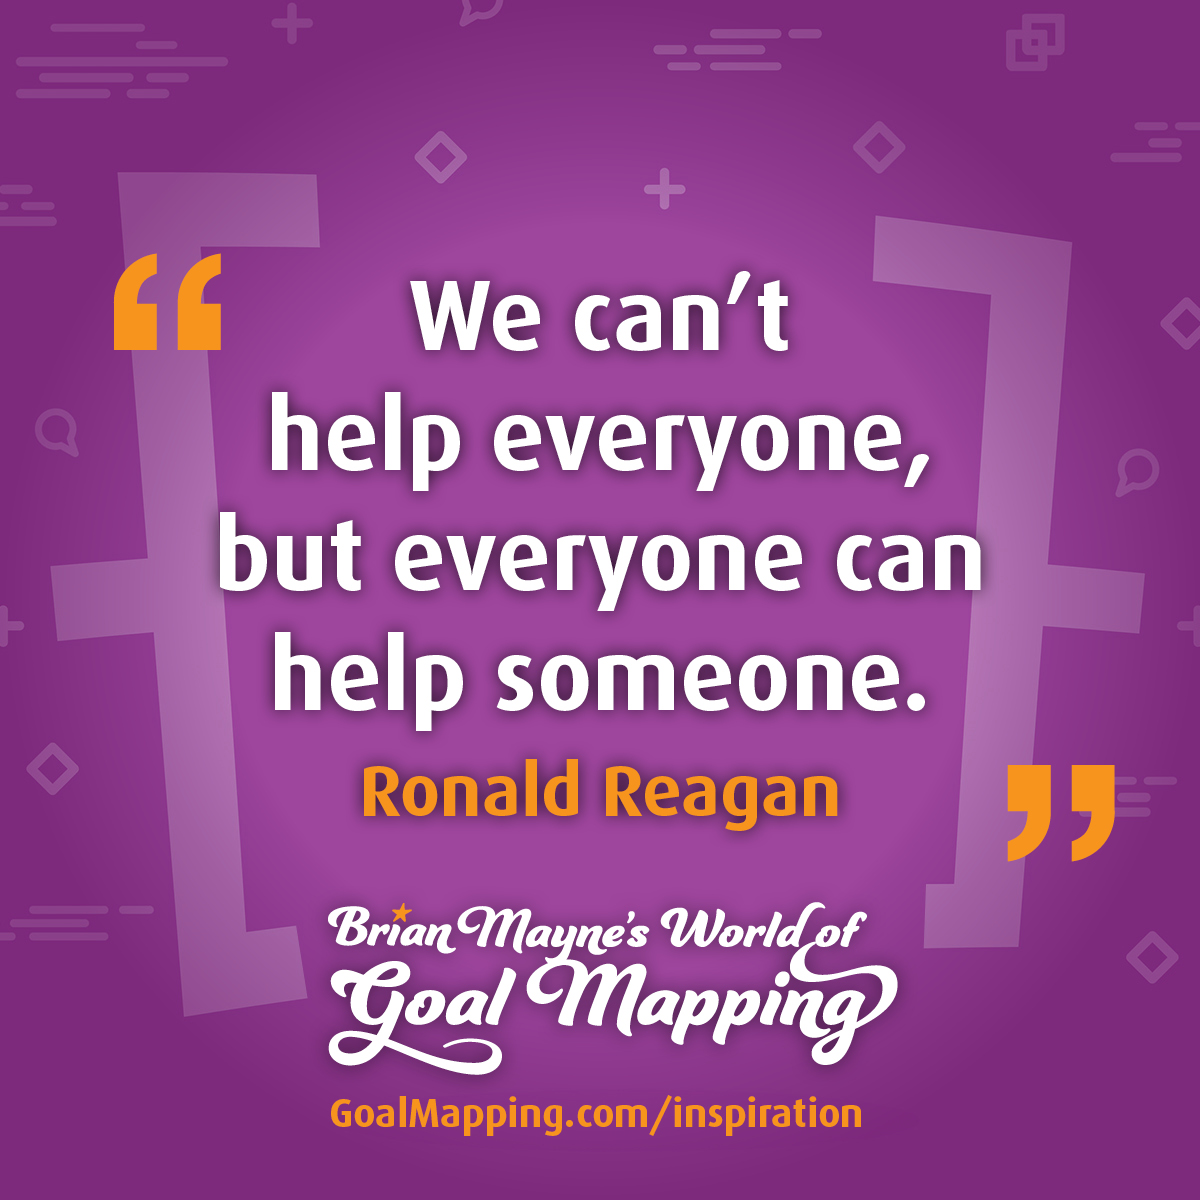 "We can’t help everyone, but everyone can help someone." Ronald Reagan